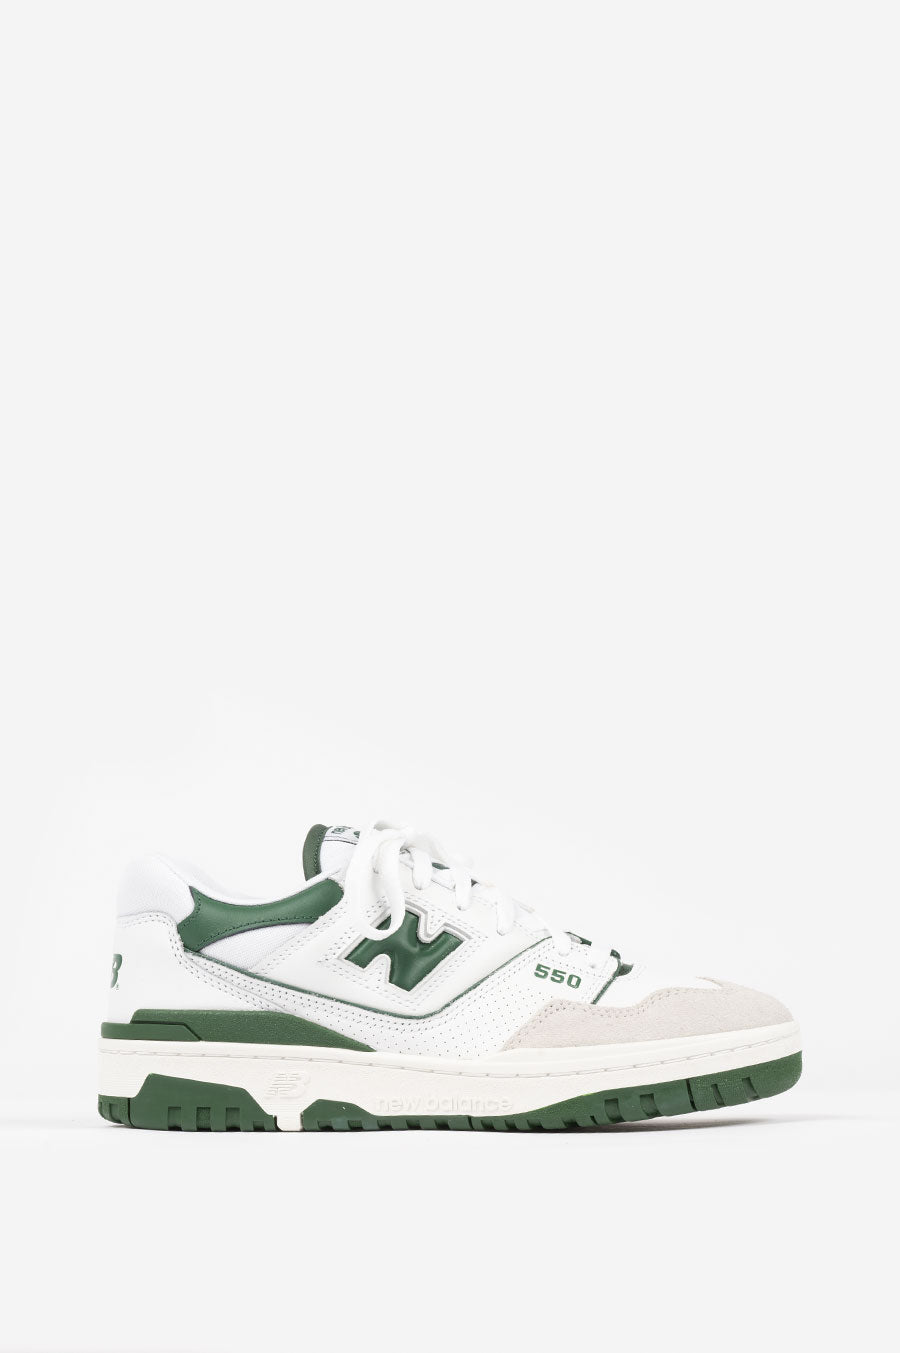 New Balance 550 White Green BB550WT1 (Size 5, 9.5, 10, 12) SHIPS TODAY